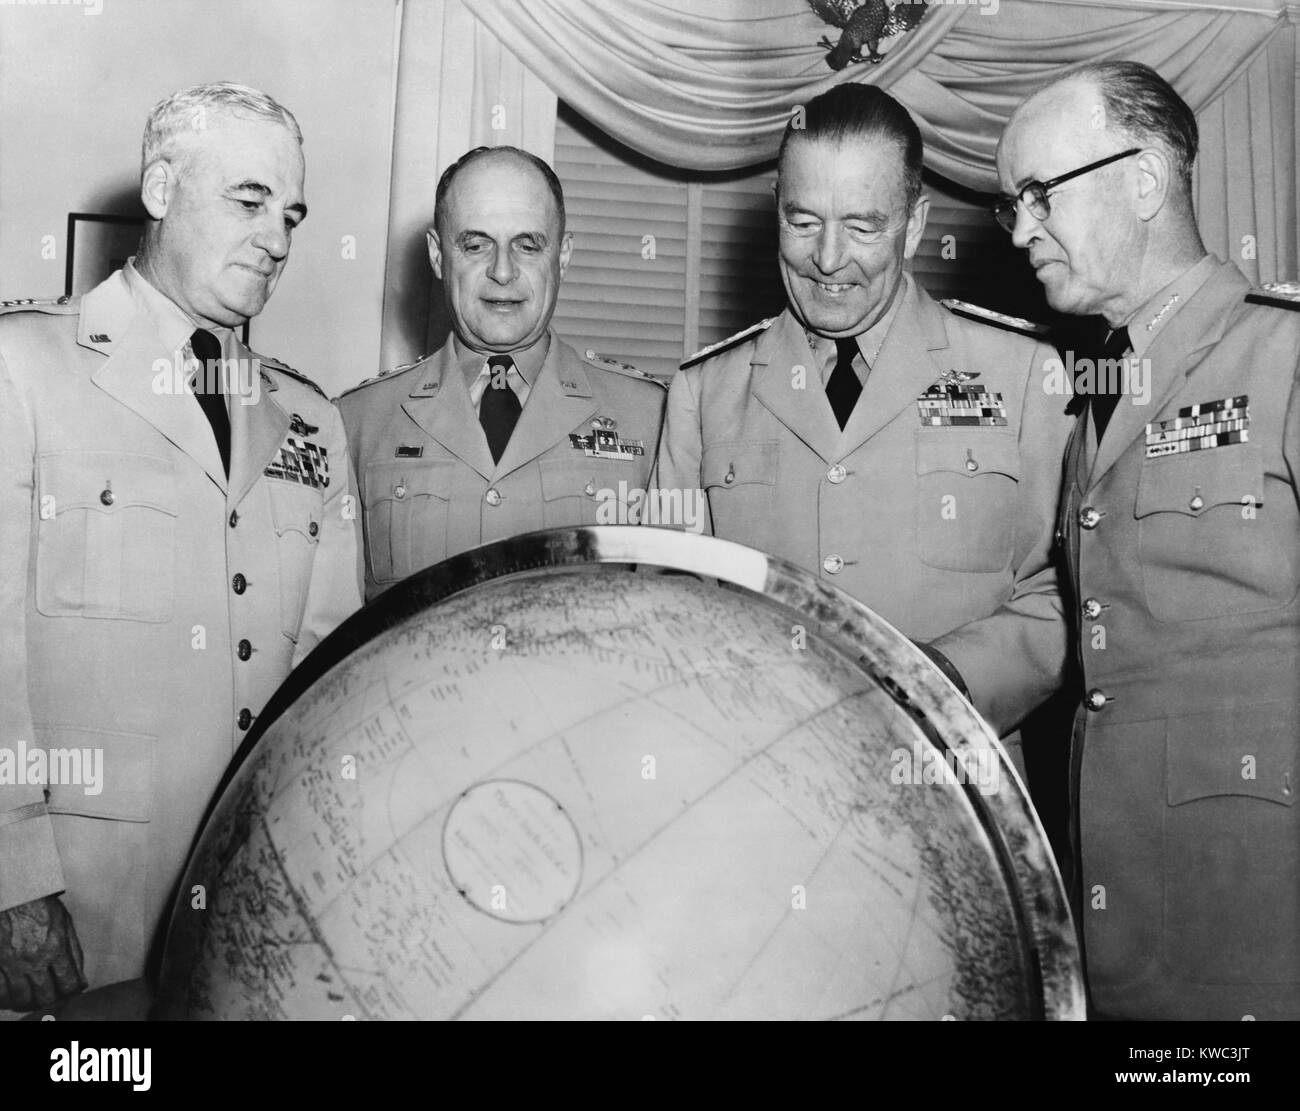 U.S. Armed Forces Joint Chiefs of Staff under President Eisenhower, 1953. Posed looking at a globe, L-R: Nathan F. Twining, Gen. Matthew Ridgeway, Admiral Arthur Radford and Admiral Robert B. Carney. (BSLOC 2015 14 126) Stock Photo